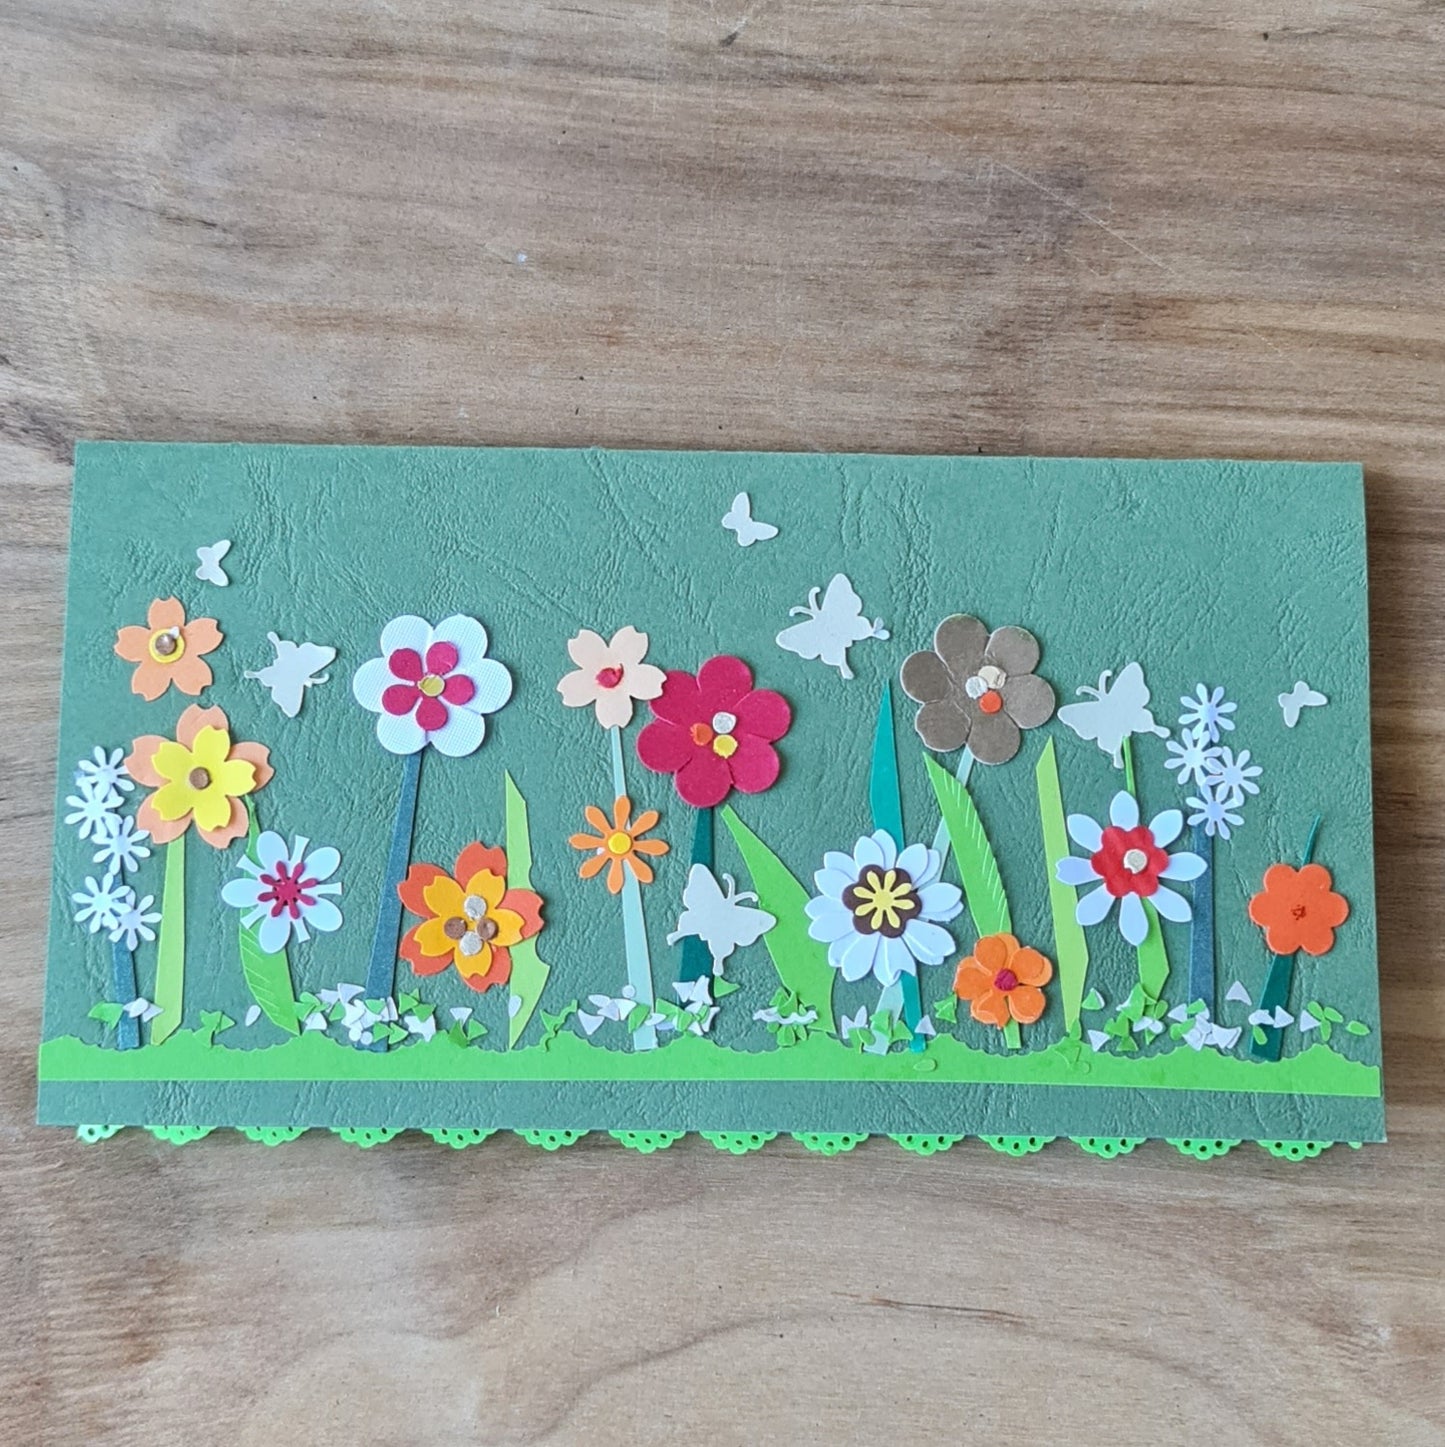 Paper card 3D on green background with colorful flower and butterfly decorations and lace border / horizontal 21 x 10.5 cm (AMA)